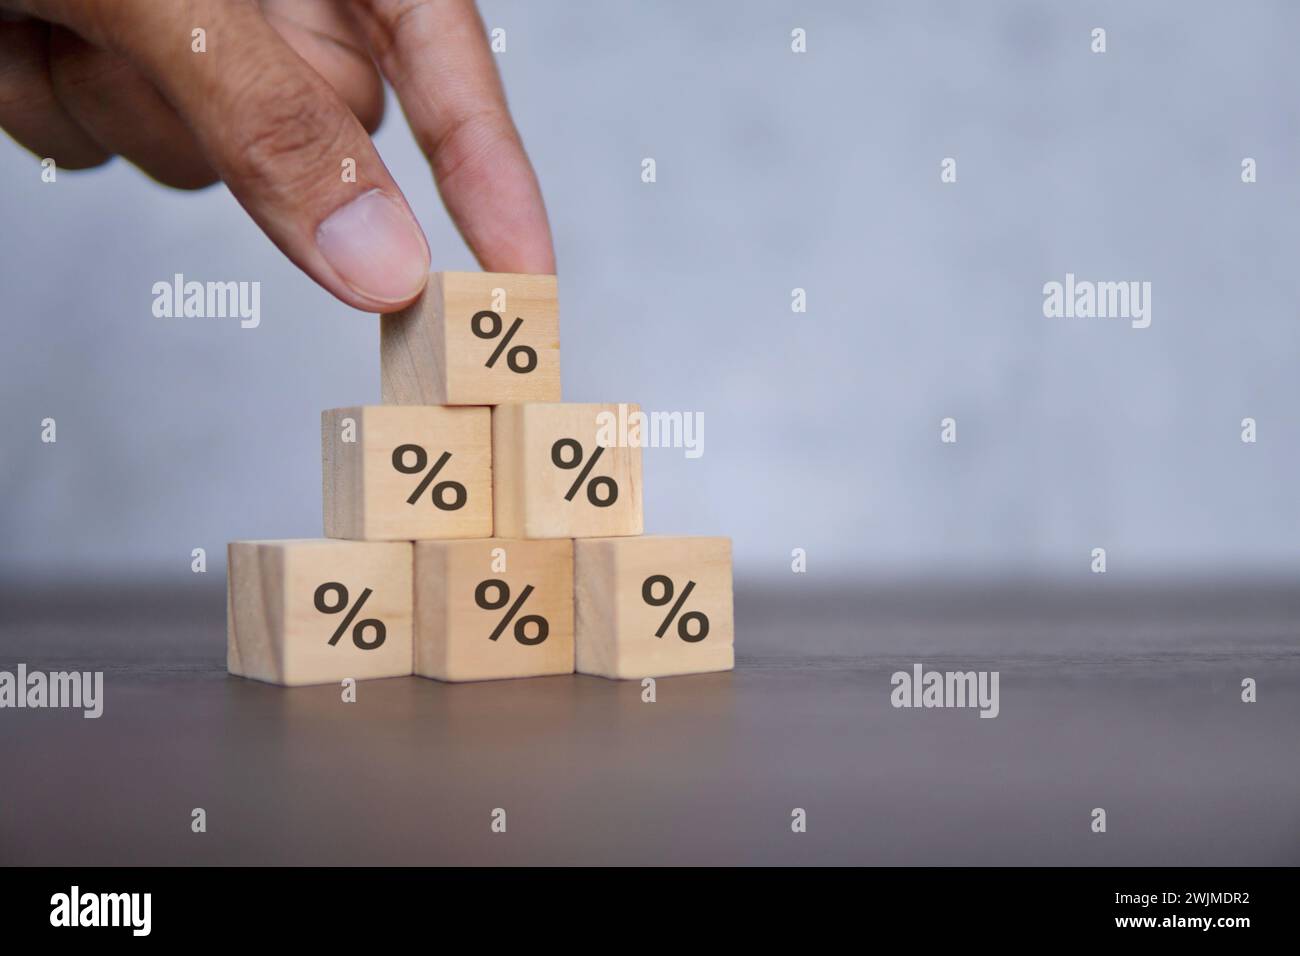 Hand arranging stacking wooden blocks with percentage icon. Debt restructure concept. Stock Photo